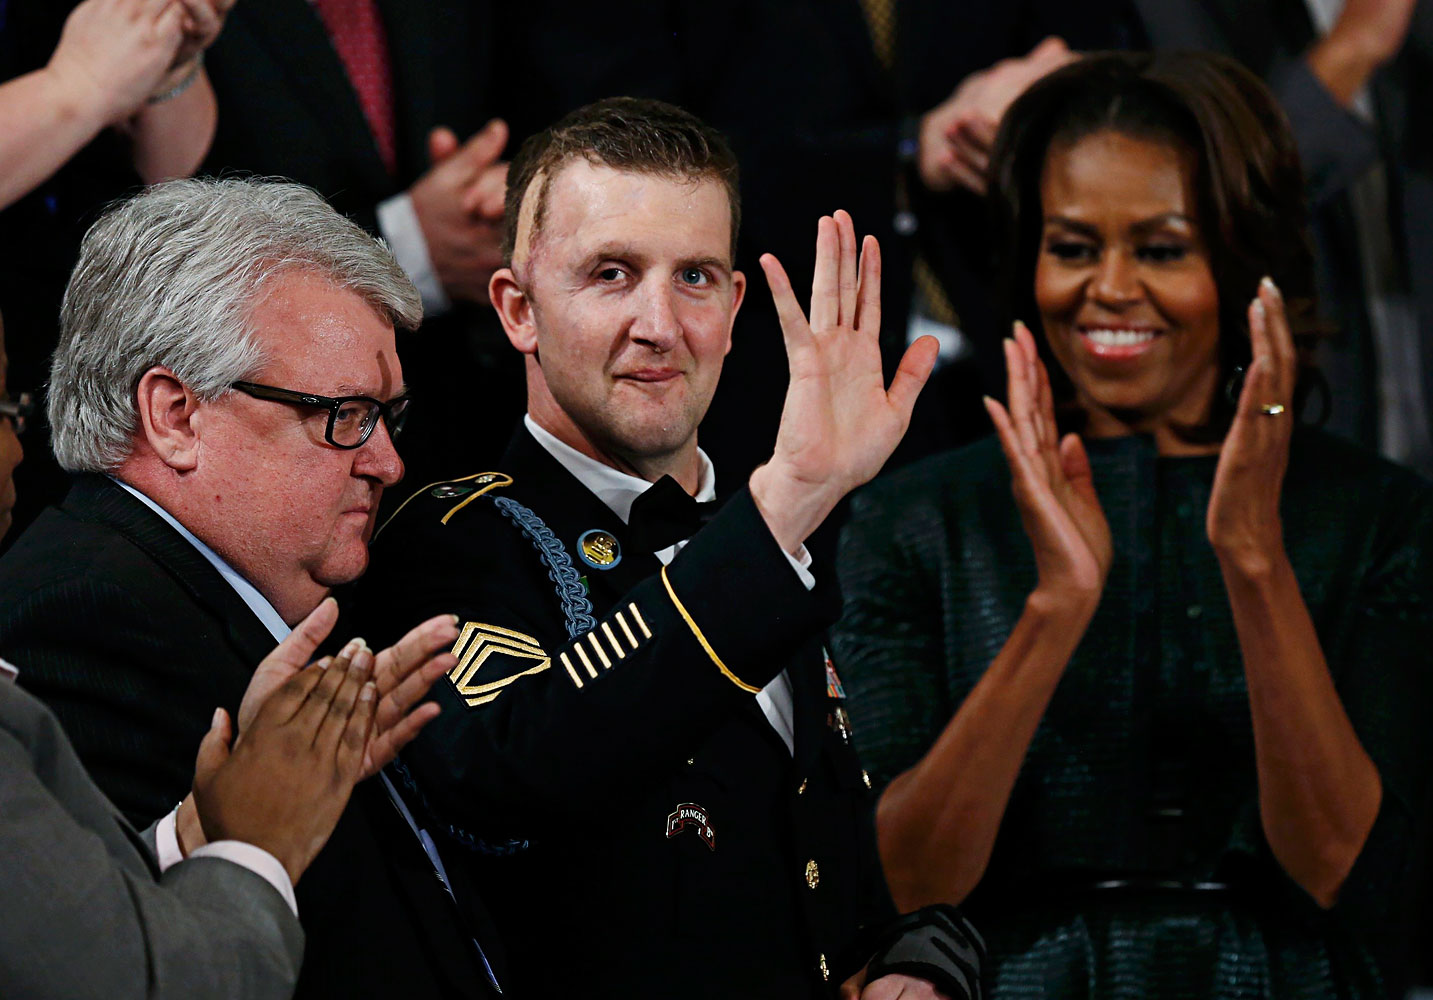 First lady Michelle Obama applauds U.S. Army Ranger Sgt. First Class Cory Remsburg, injured while serving in Afghanistan, during President Barack Obama's State of the Union speech on Capitol Hill in Washington, Jan. 28, 2014. (Gary Cameron / Reuters)